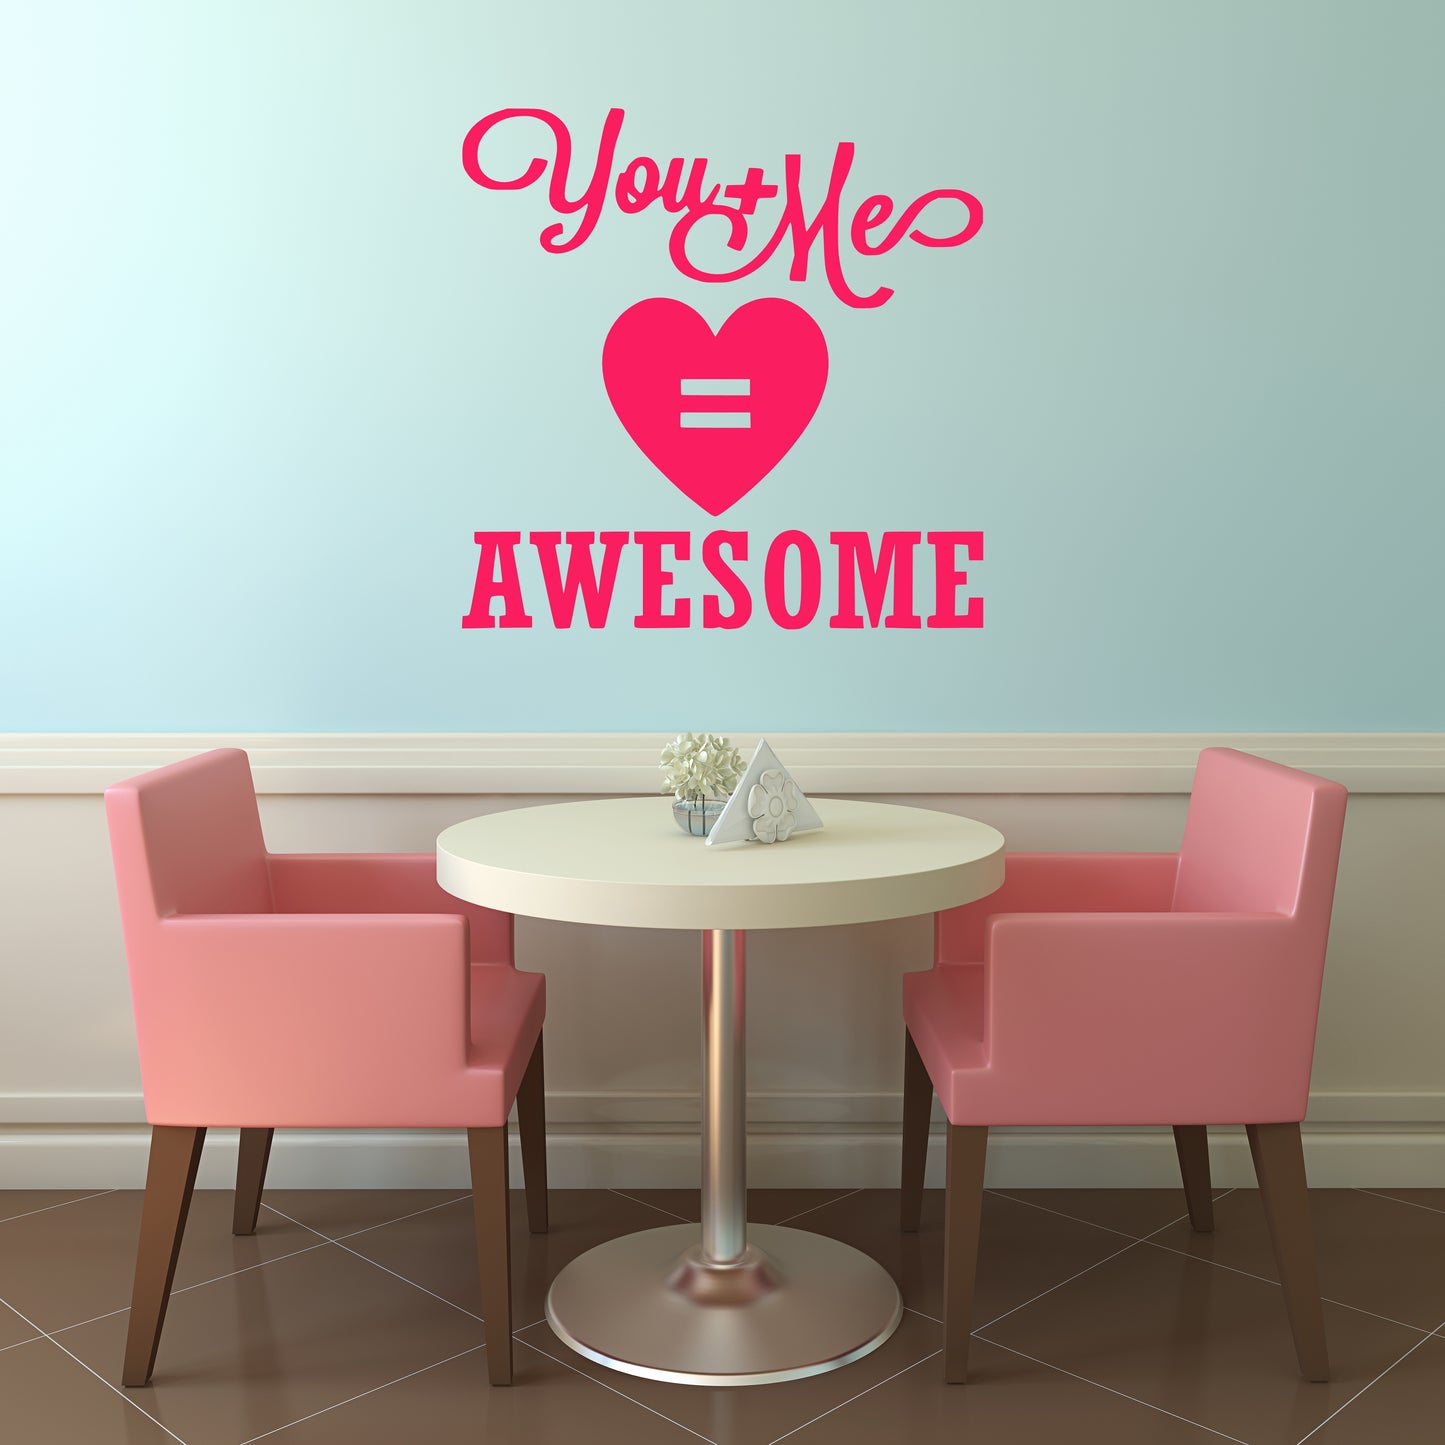 You + me = awesome | Wall quote-Wall quote-Adnil Creations